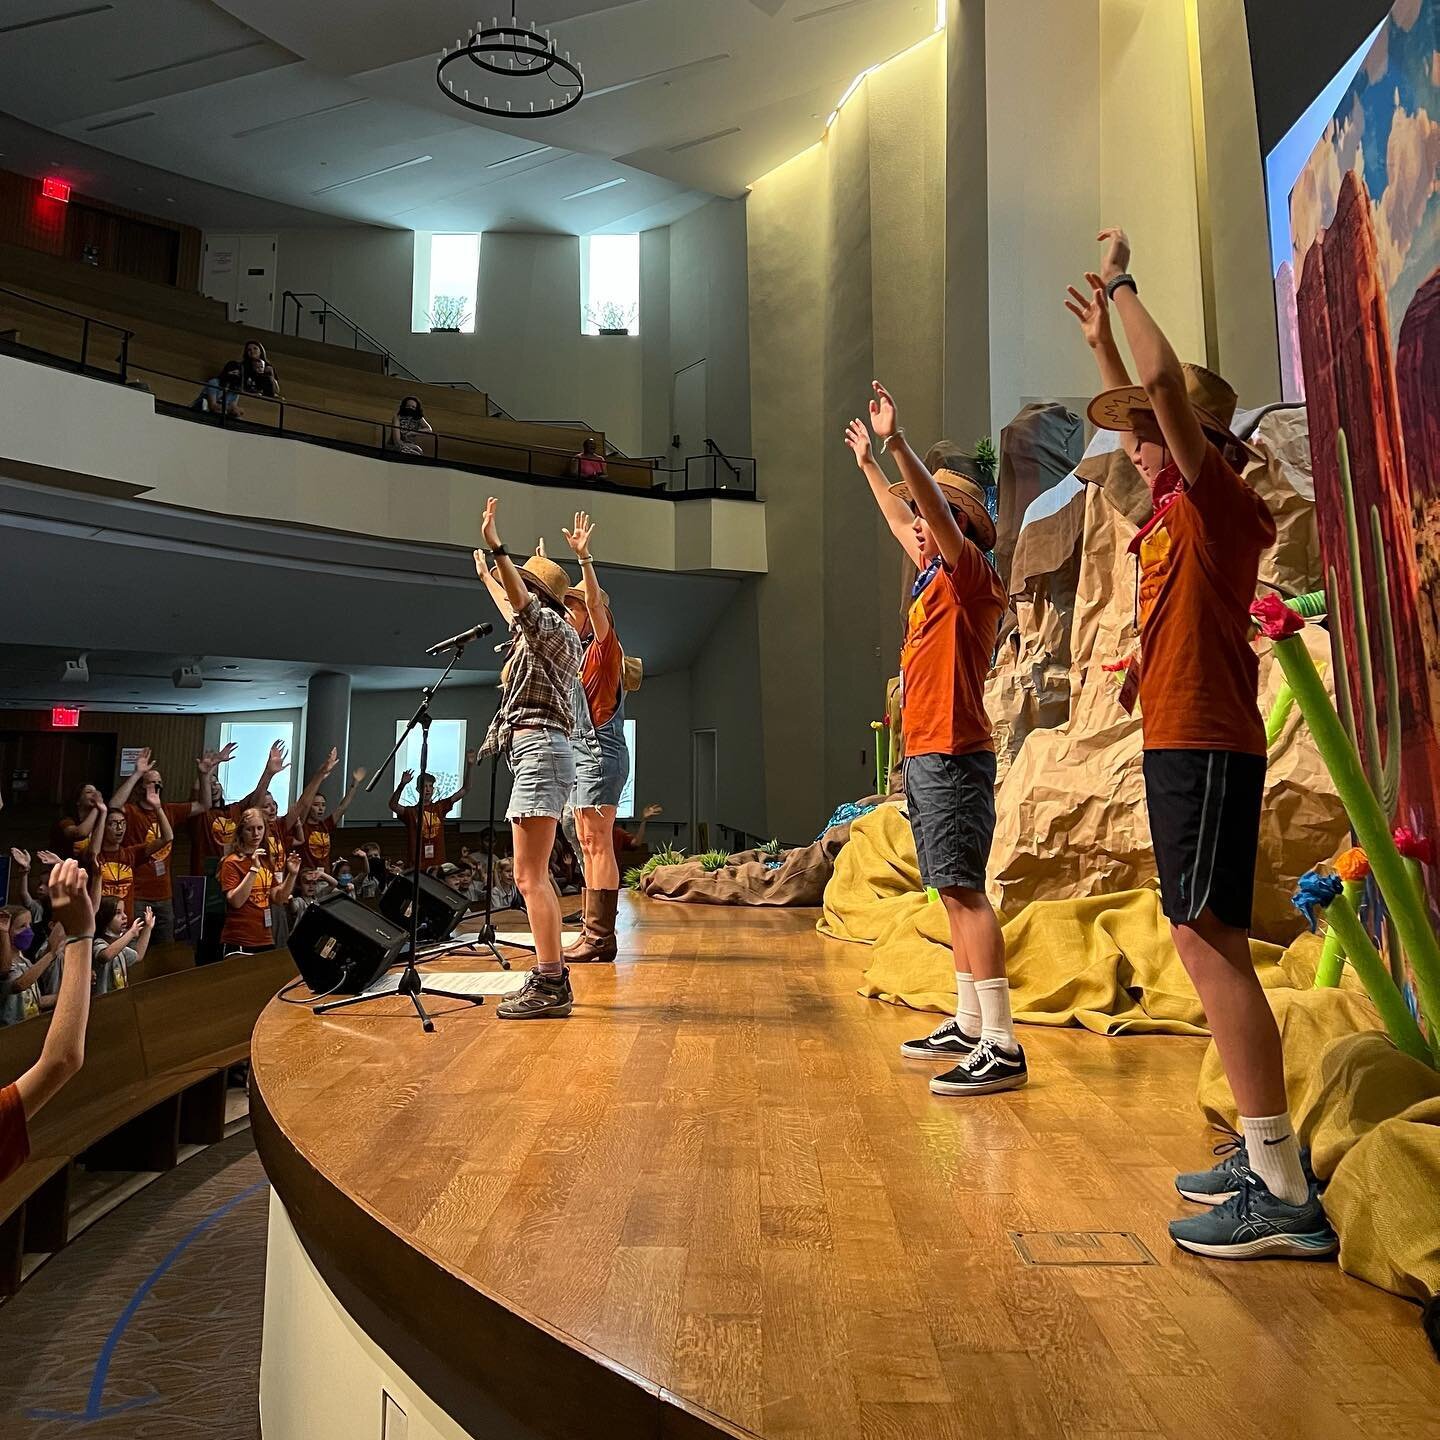 Here&rsquo;s a sampling of what our amazing Middle School Work Crew has been up to this week at VBS. (Check out the last photo for the behind-the-scenes job that&rsquo;s kept us VERY busy).